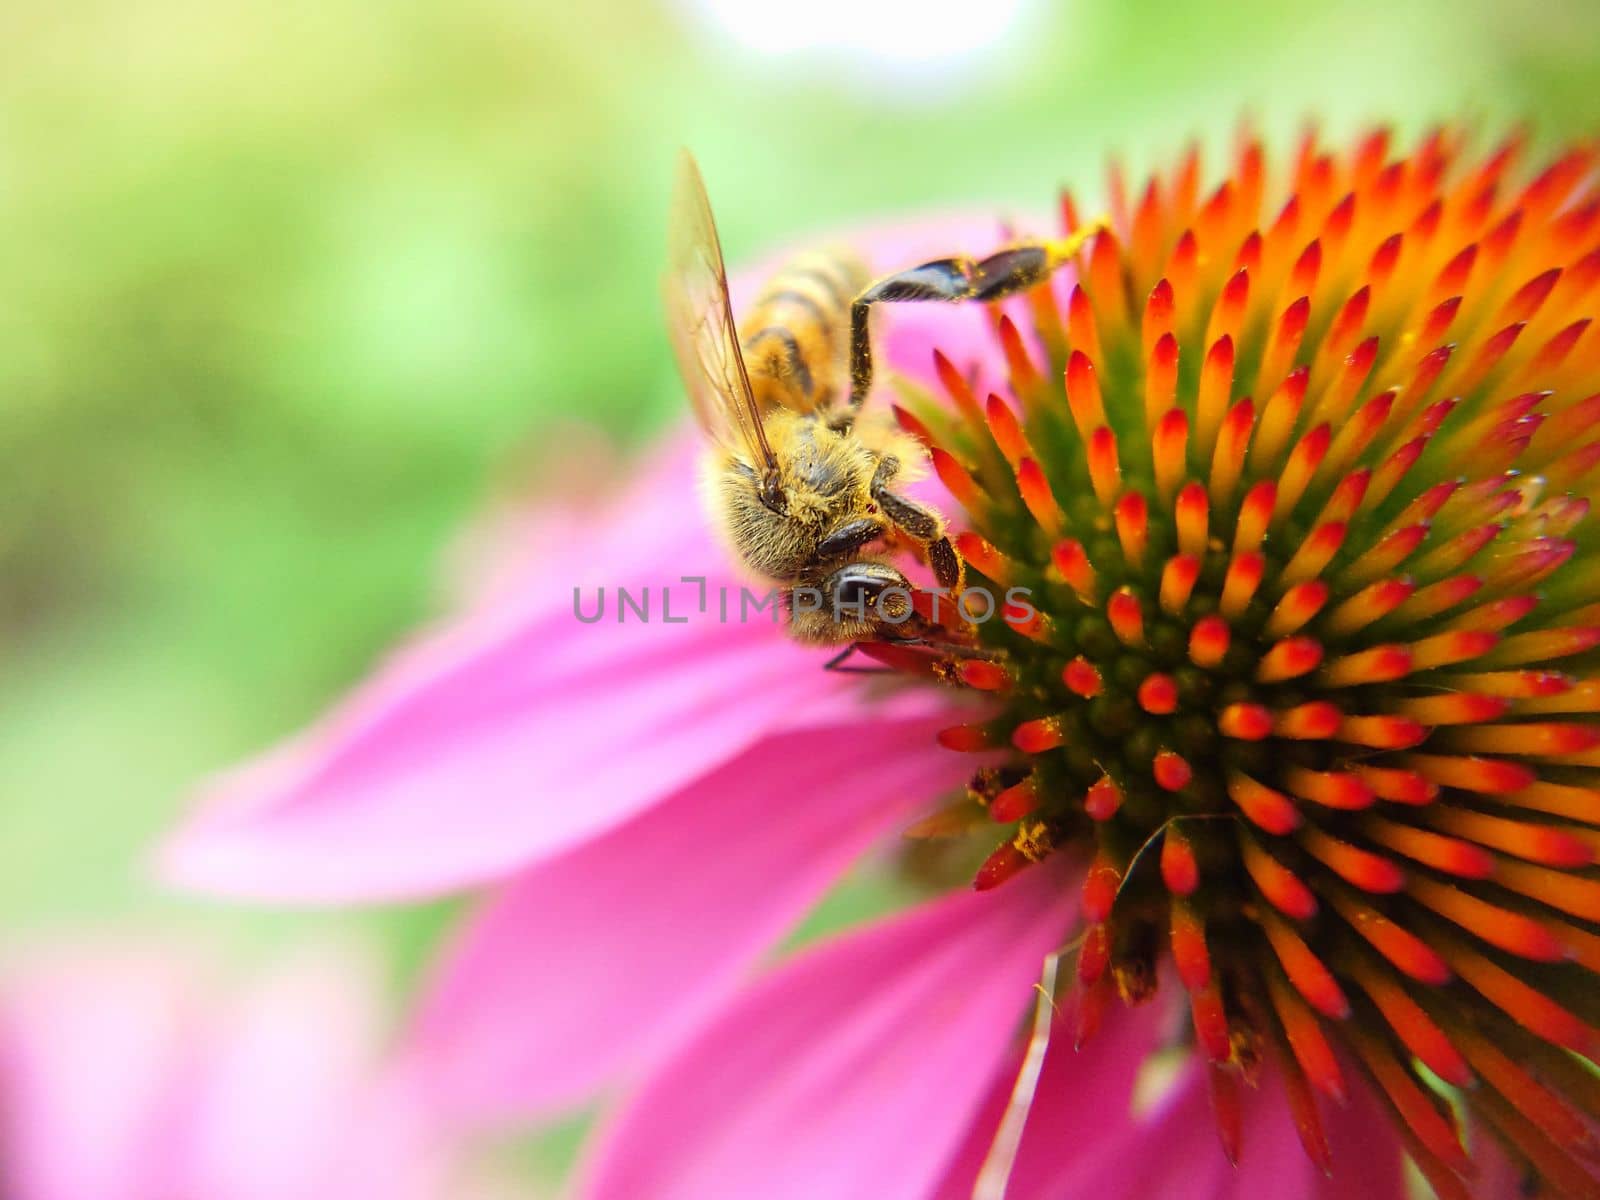 A bee collects nectar on an echinacea flower by Mastak80